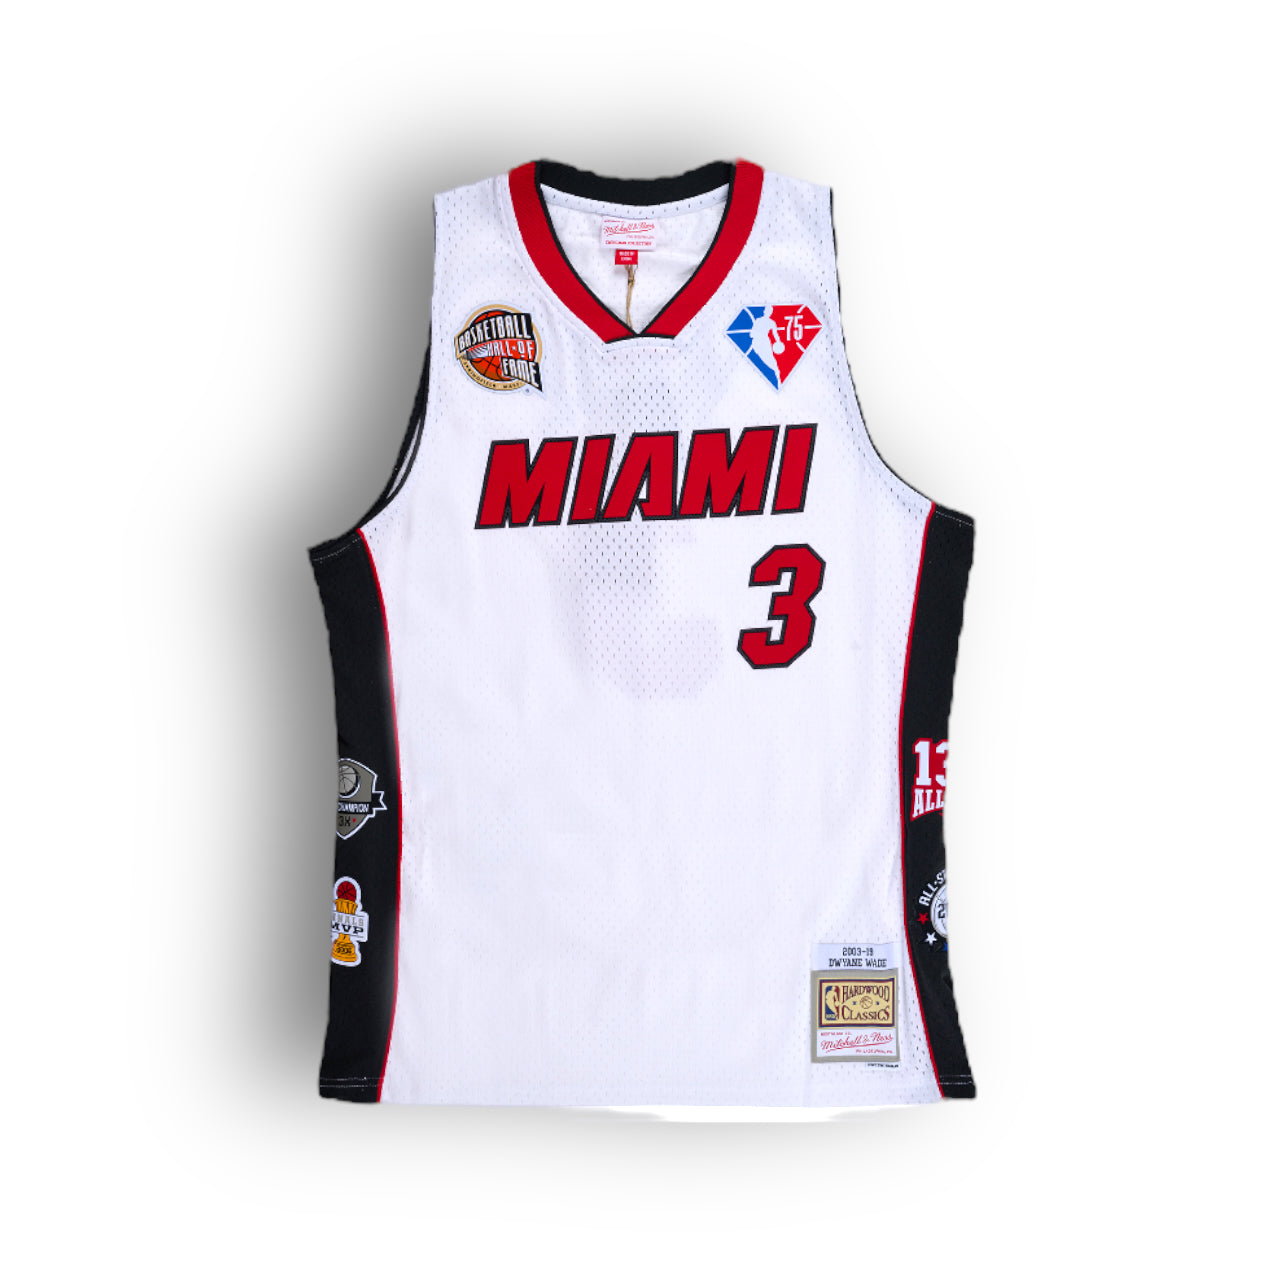 Dwyane Wade Miami Heat Hall of Fame NBA 75th Player Special Edition Mitchell & Ness Swingman Jersey - White/Red